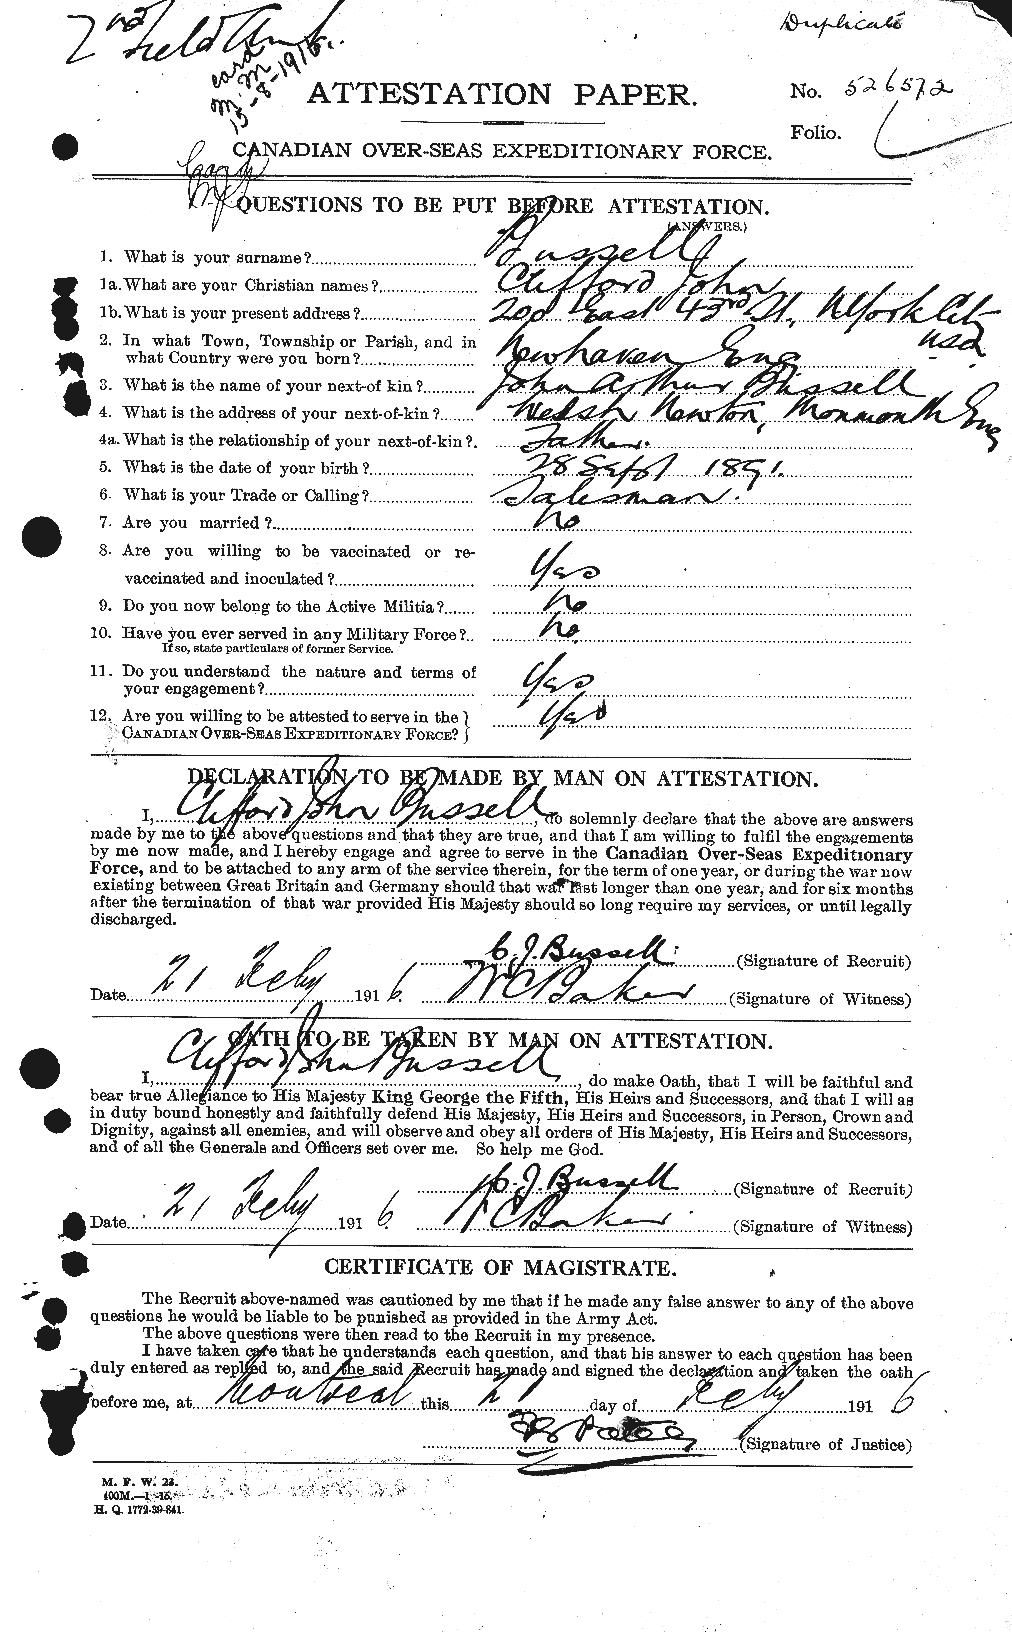 Personnel Records of the First World War - CEF 274581a